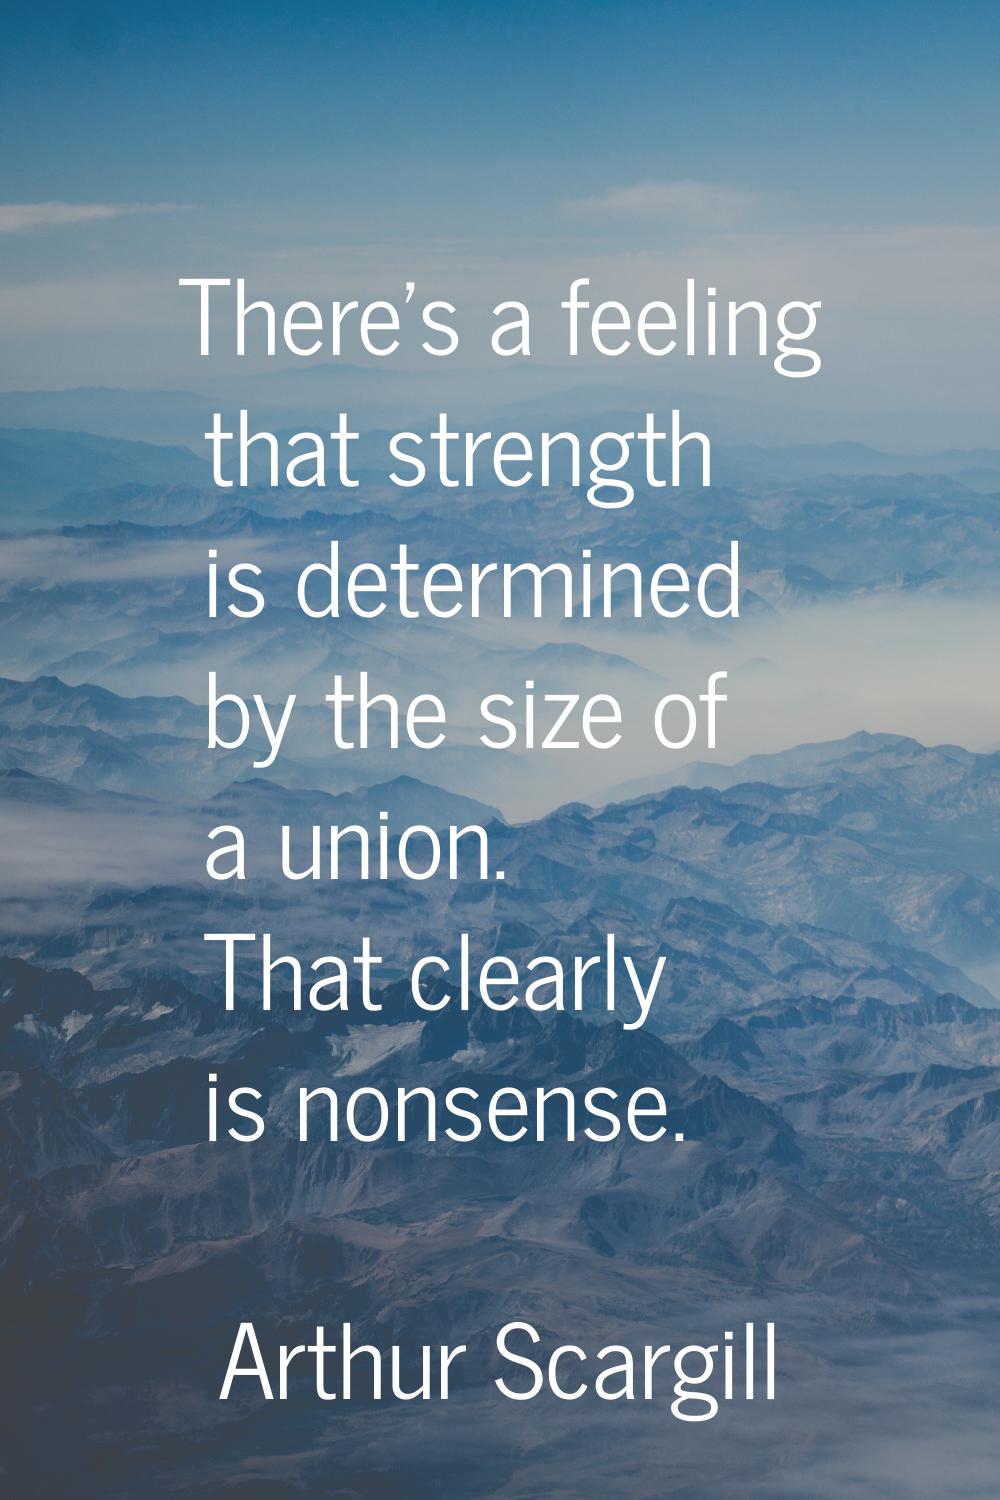 There's a feeling that strength is determined by the size of a union. That clearly is nonsense.